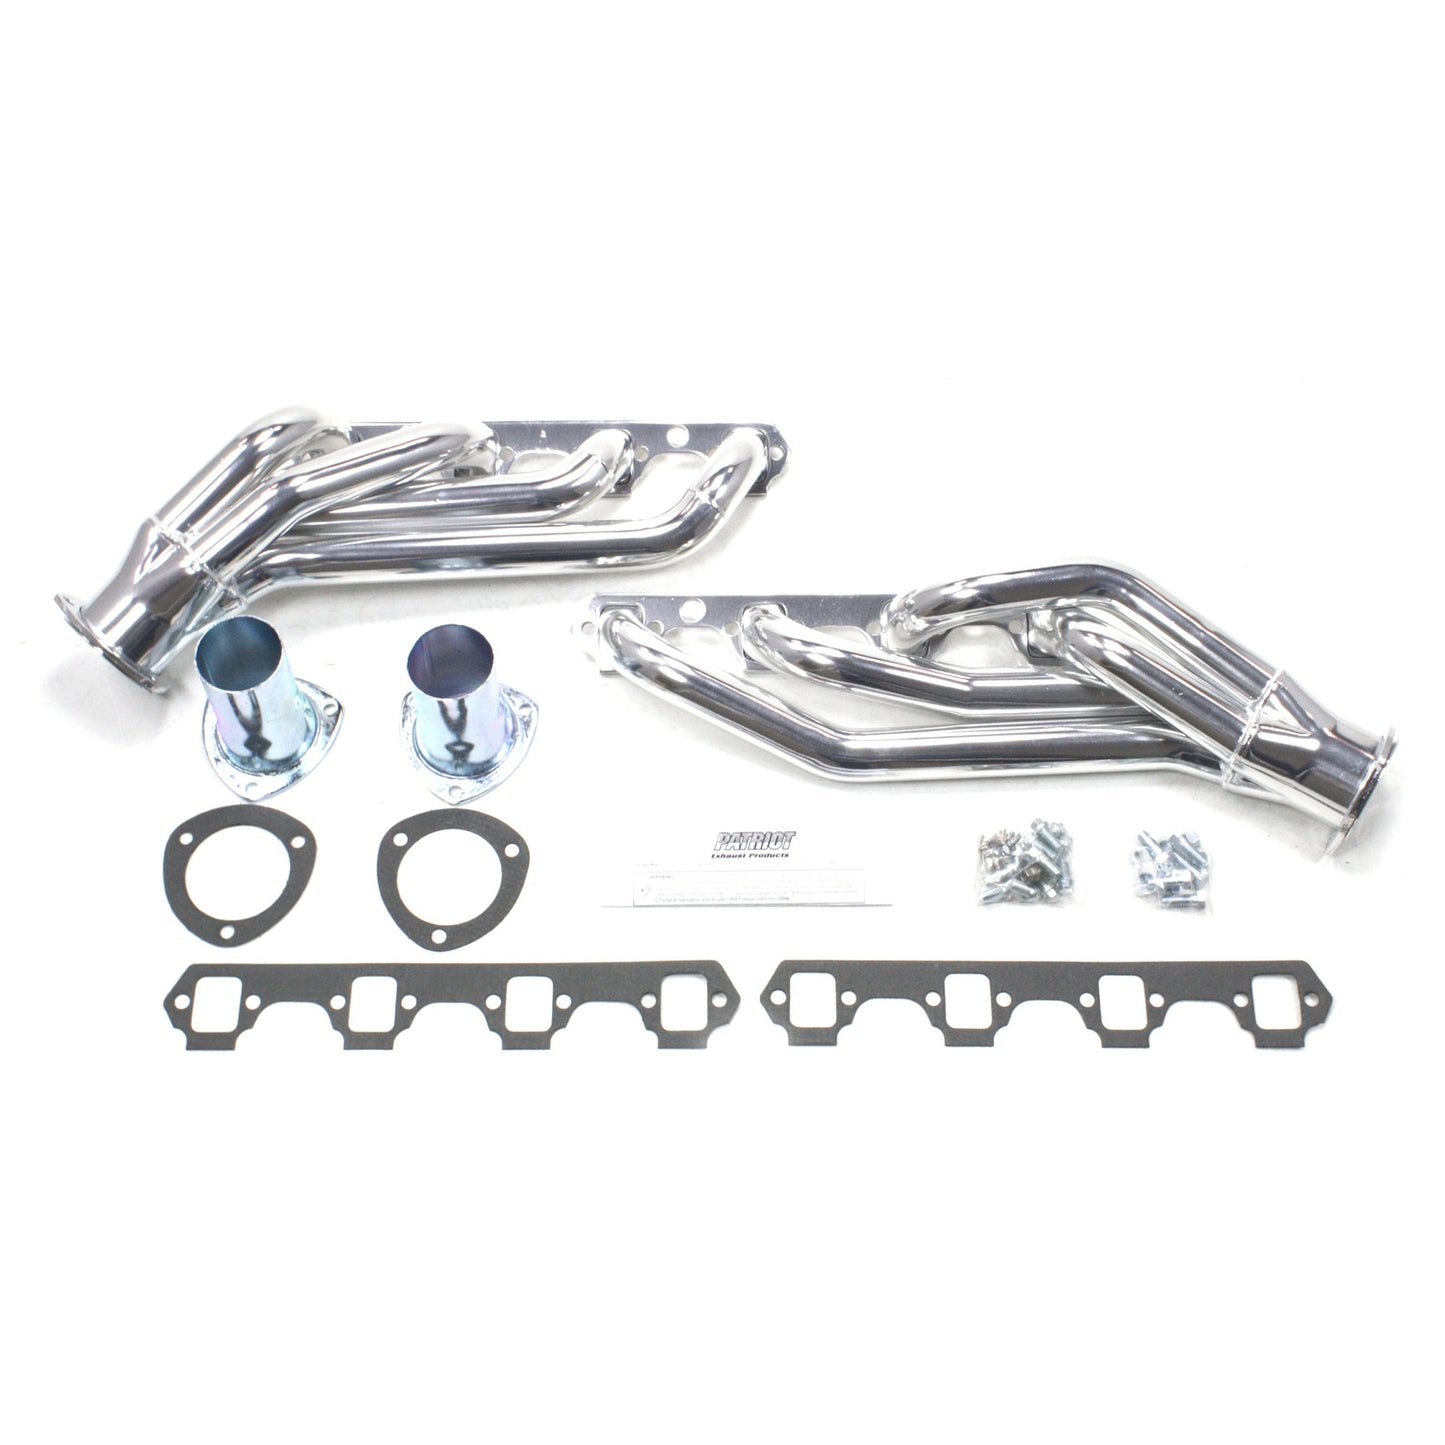 Patriot Exhaust H8433-1 1 5/8" Clippster Header Ford Mustang Small Block Ford 64-73 Metallic Ceramic Coating